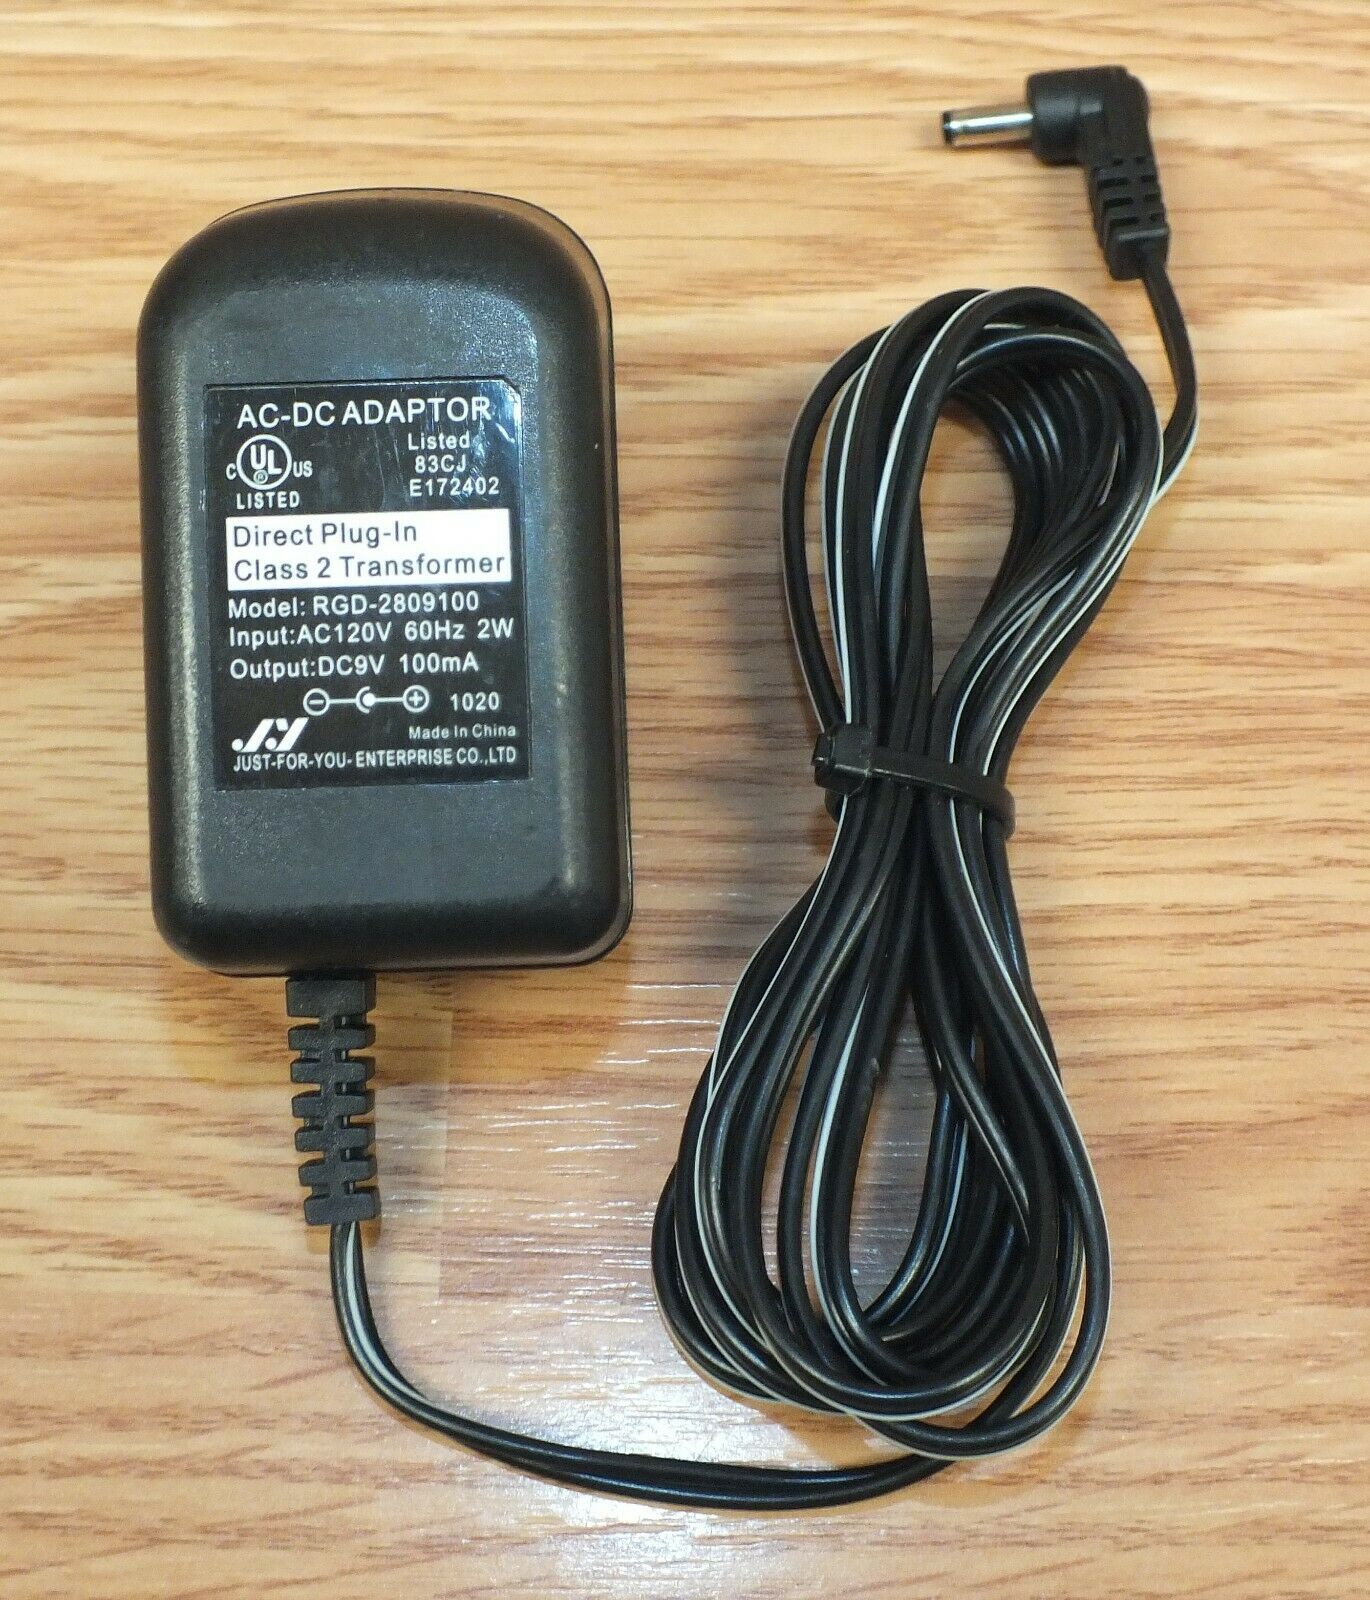 Unbranded (RGD-2809100) 9V 100mA AC/DC Adapter Power Supply Type: AC/DC Adapter Output Voltage: 9 V MPN: Does Not App